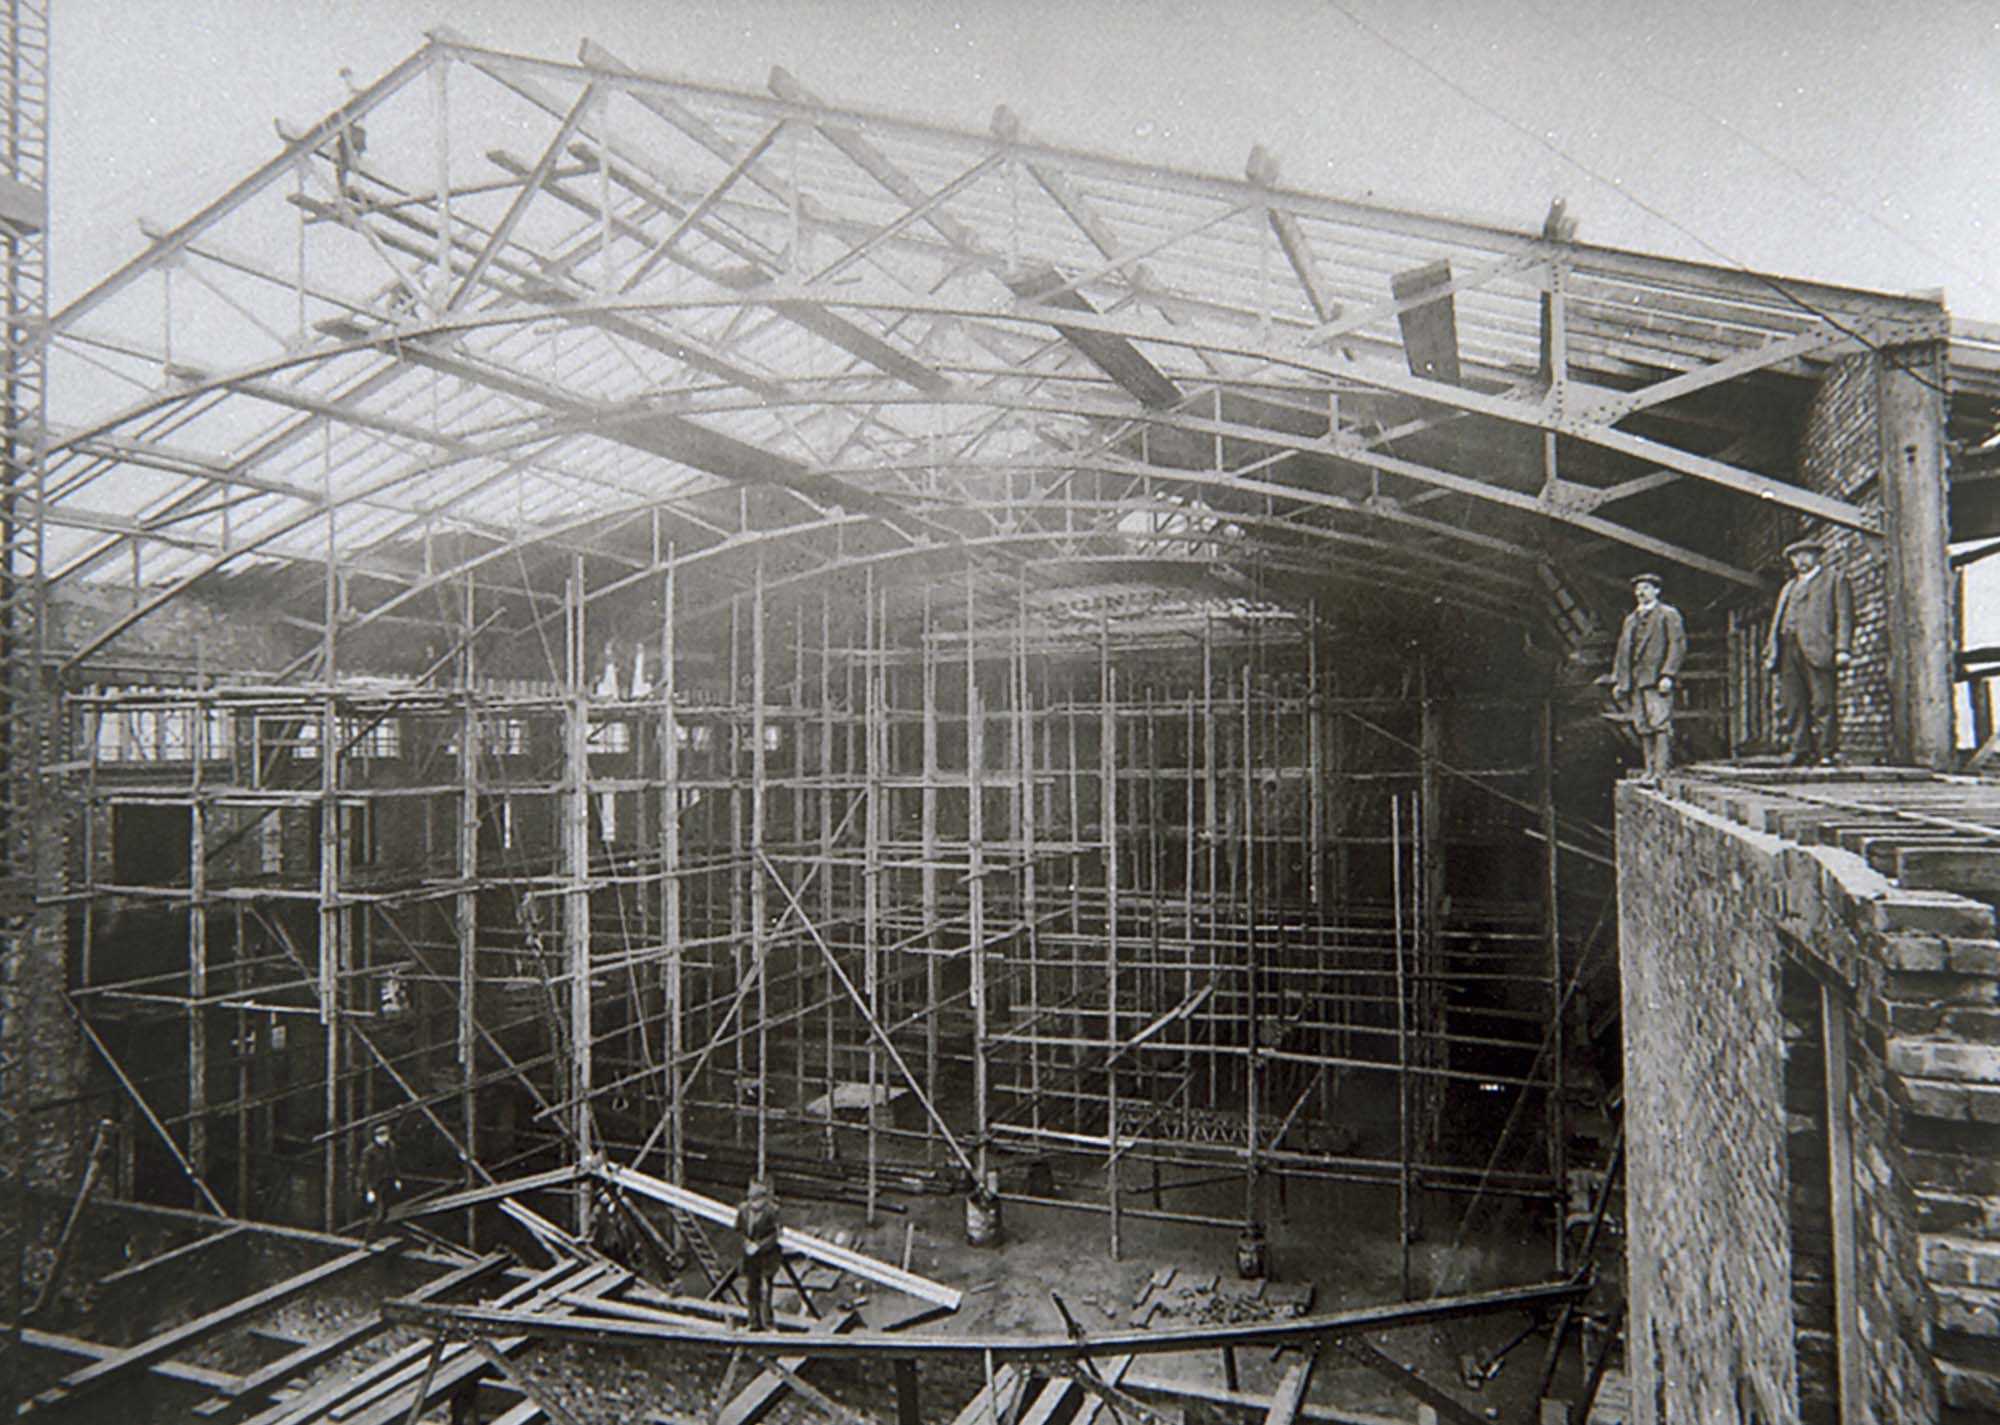 The Hall during construction during 1912 - Leicestershire Record Office